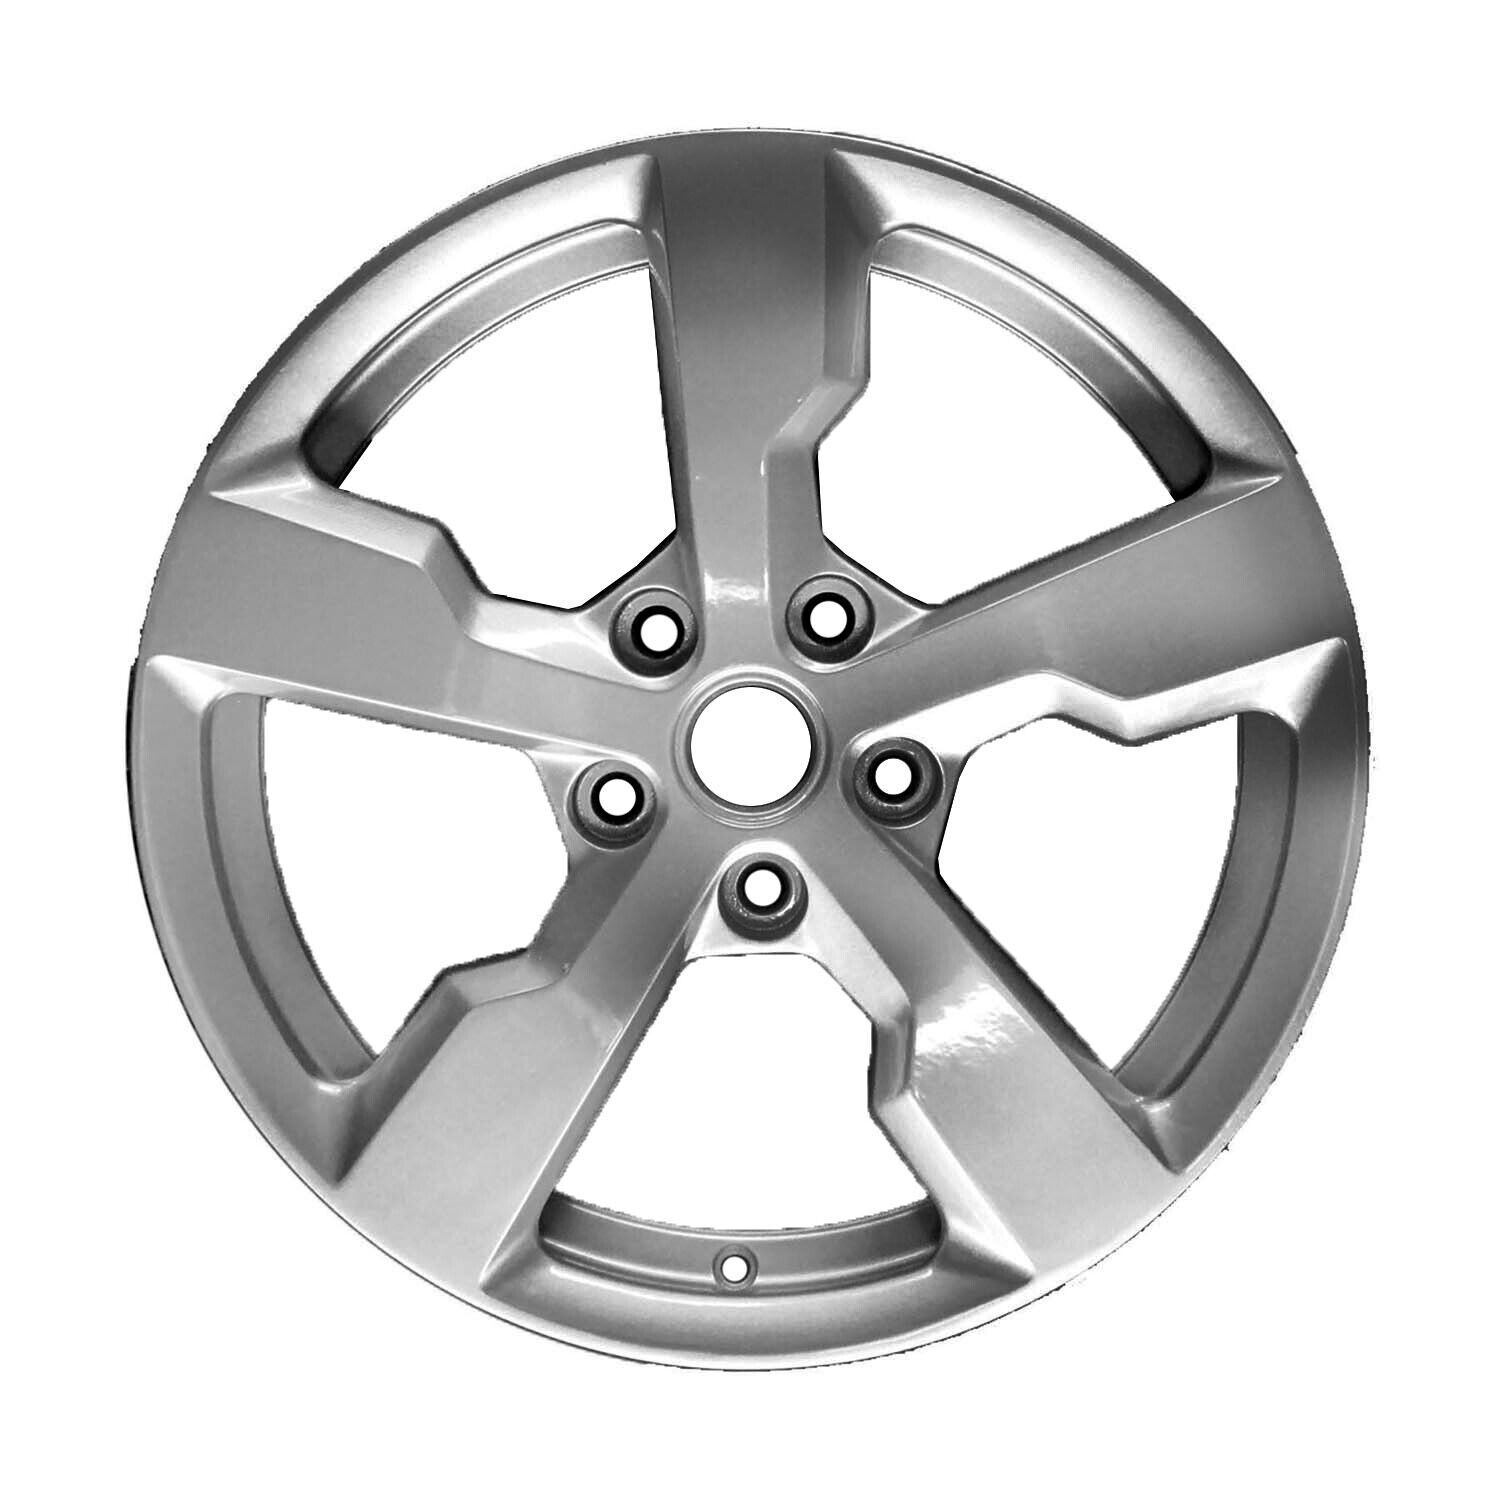 05482 Reconditioned OEM Aluminum 17x7 Polished Wheel Fits 2011-15 Chevrolet Volt